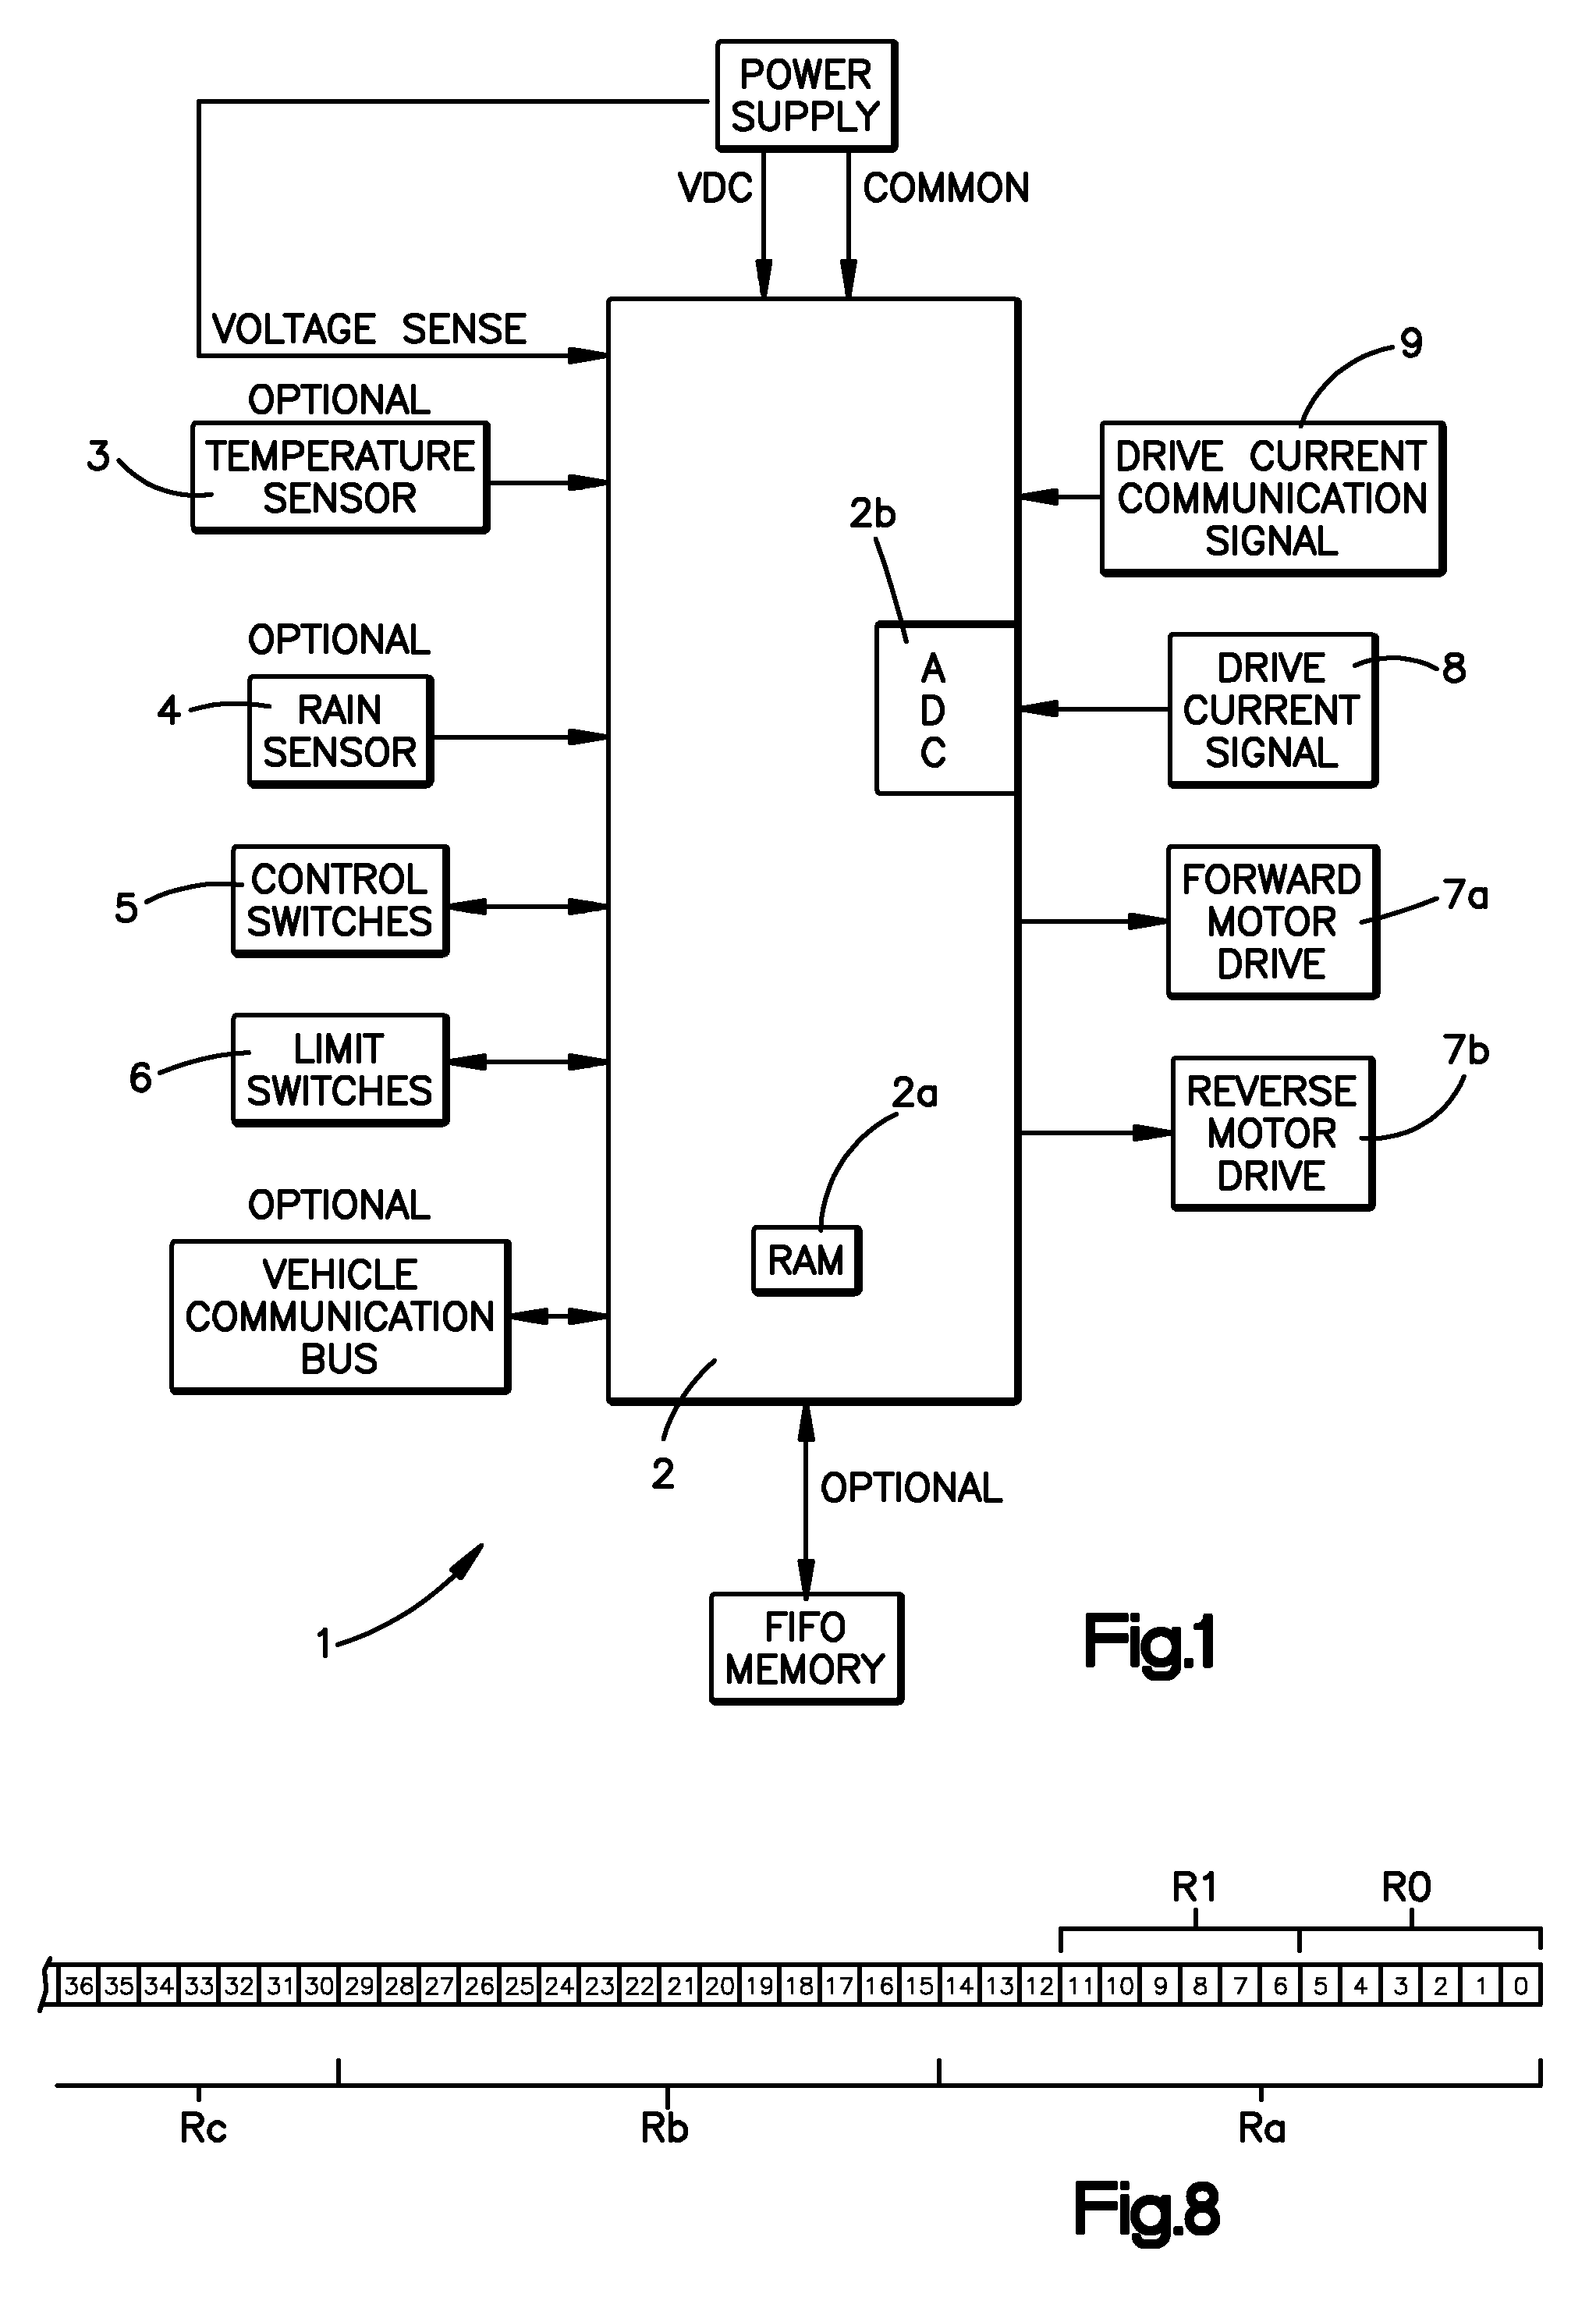 Collision monitoring system